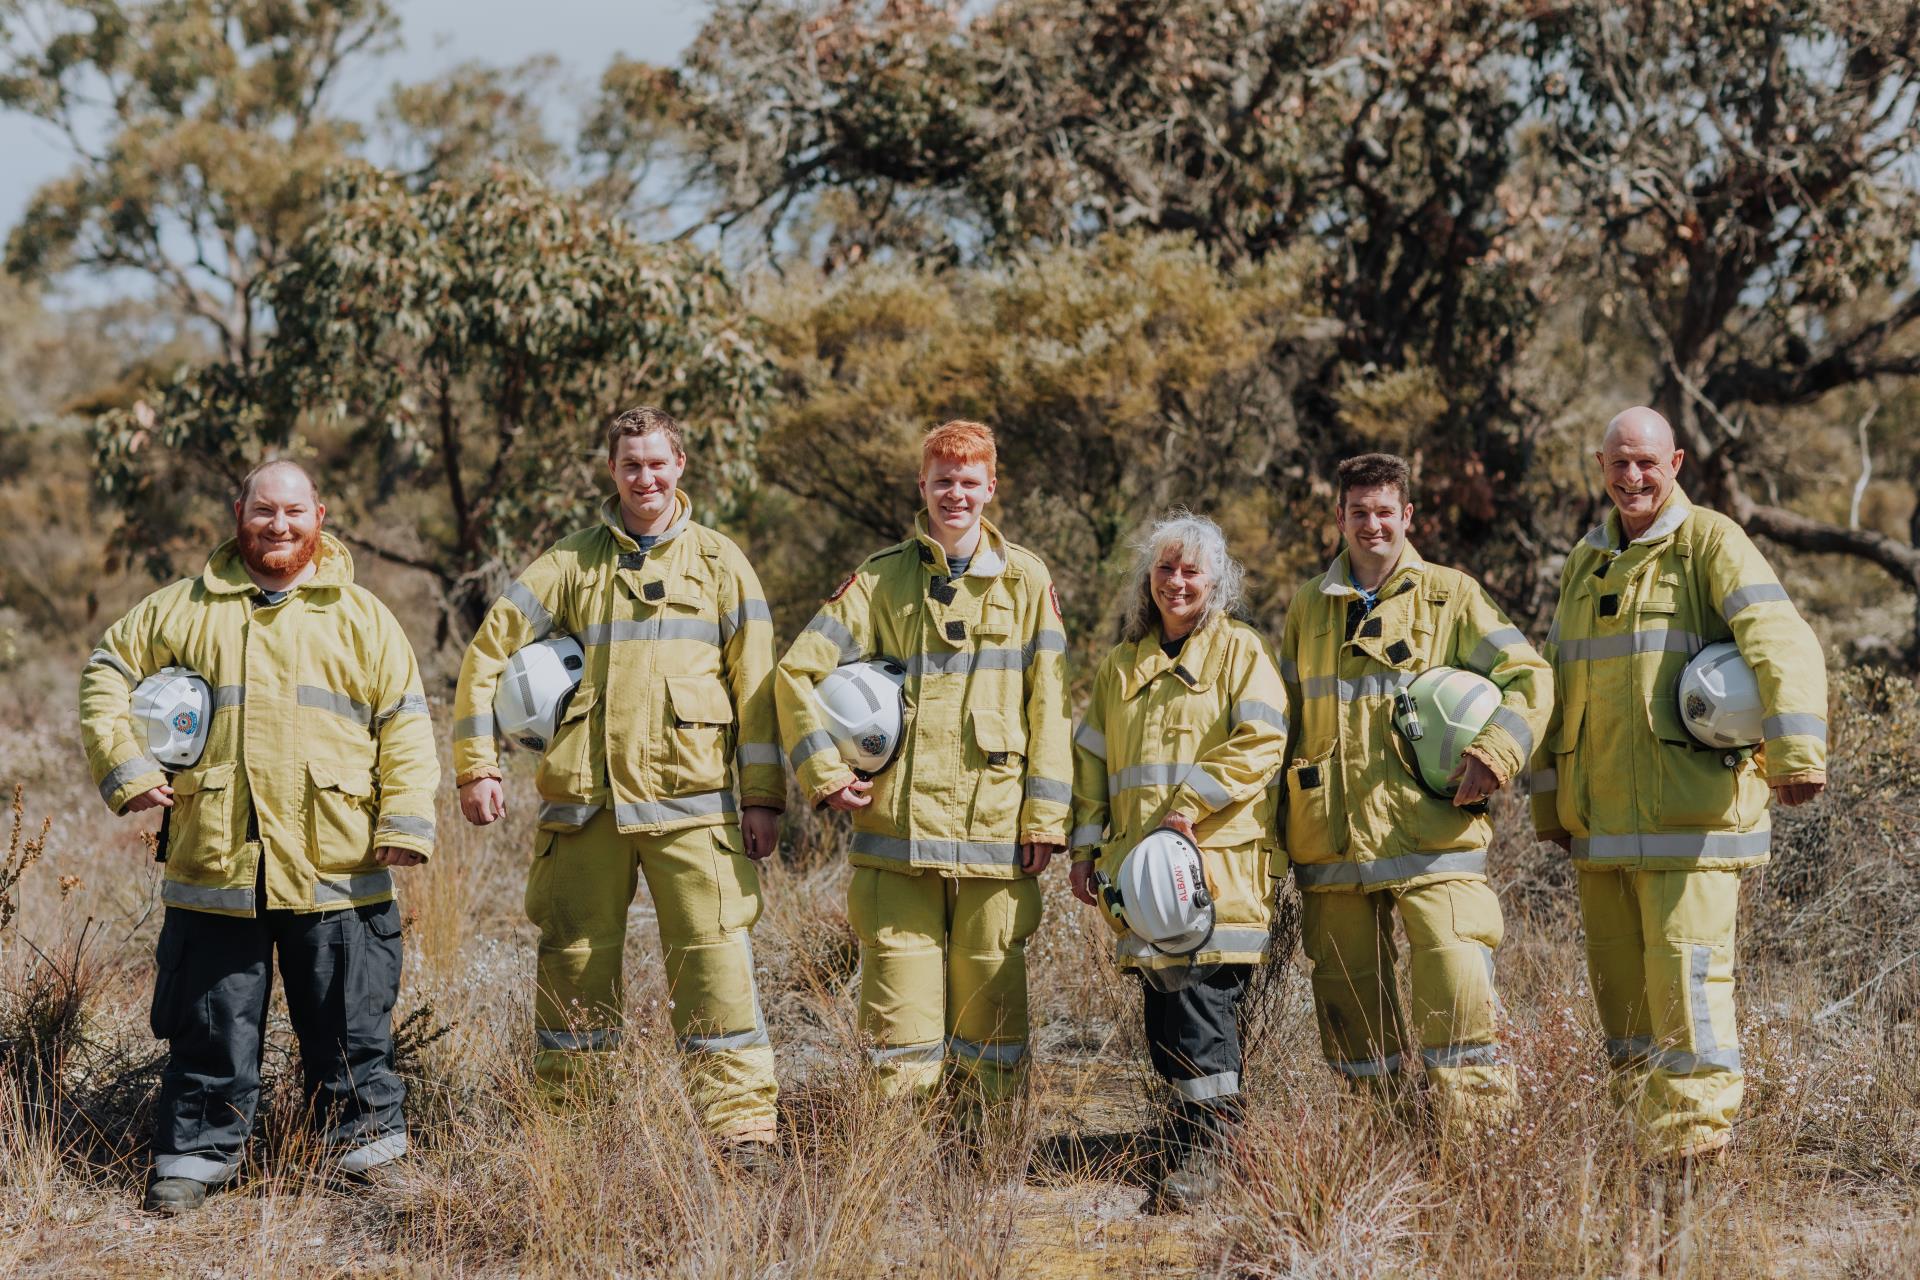 Bushfire community safety reaches new heights